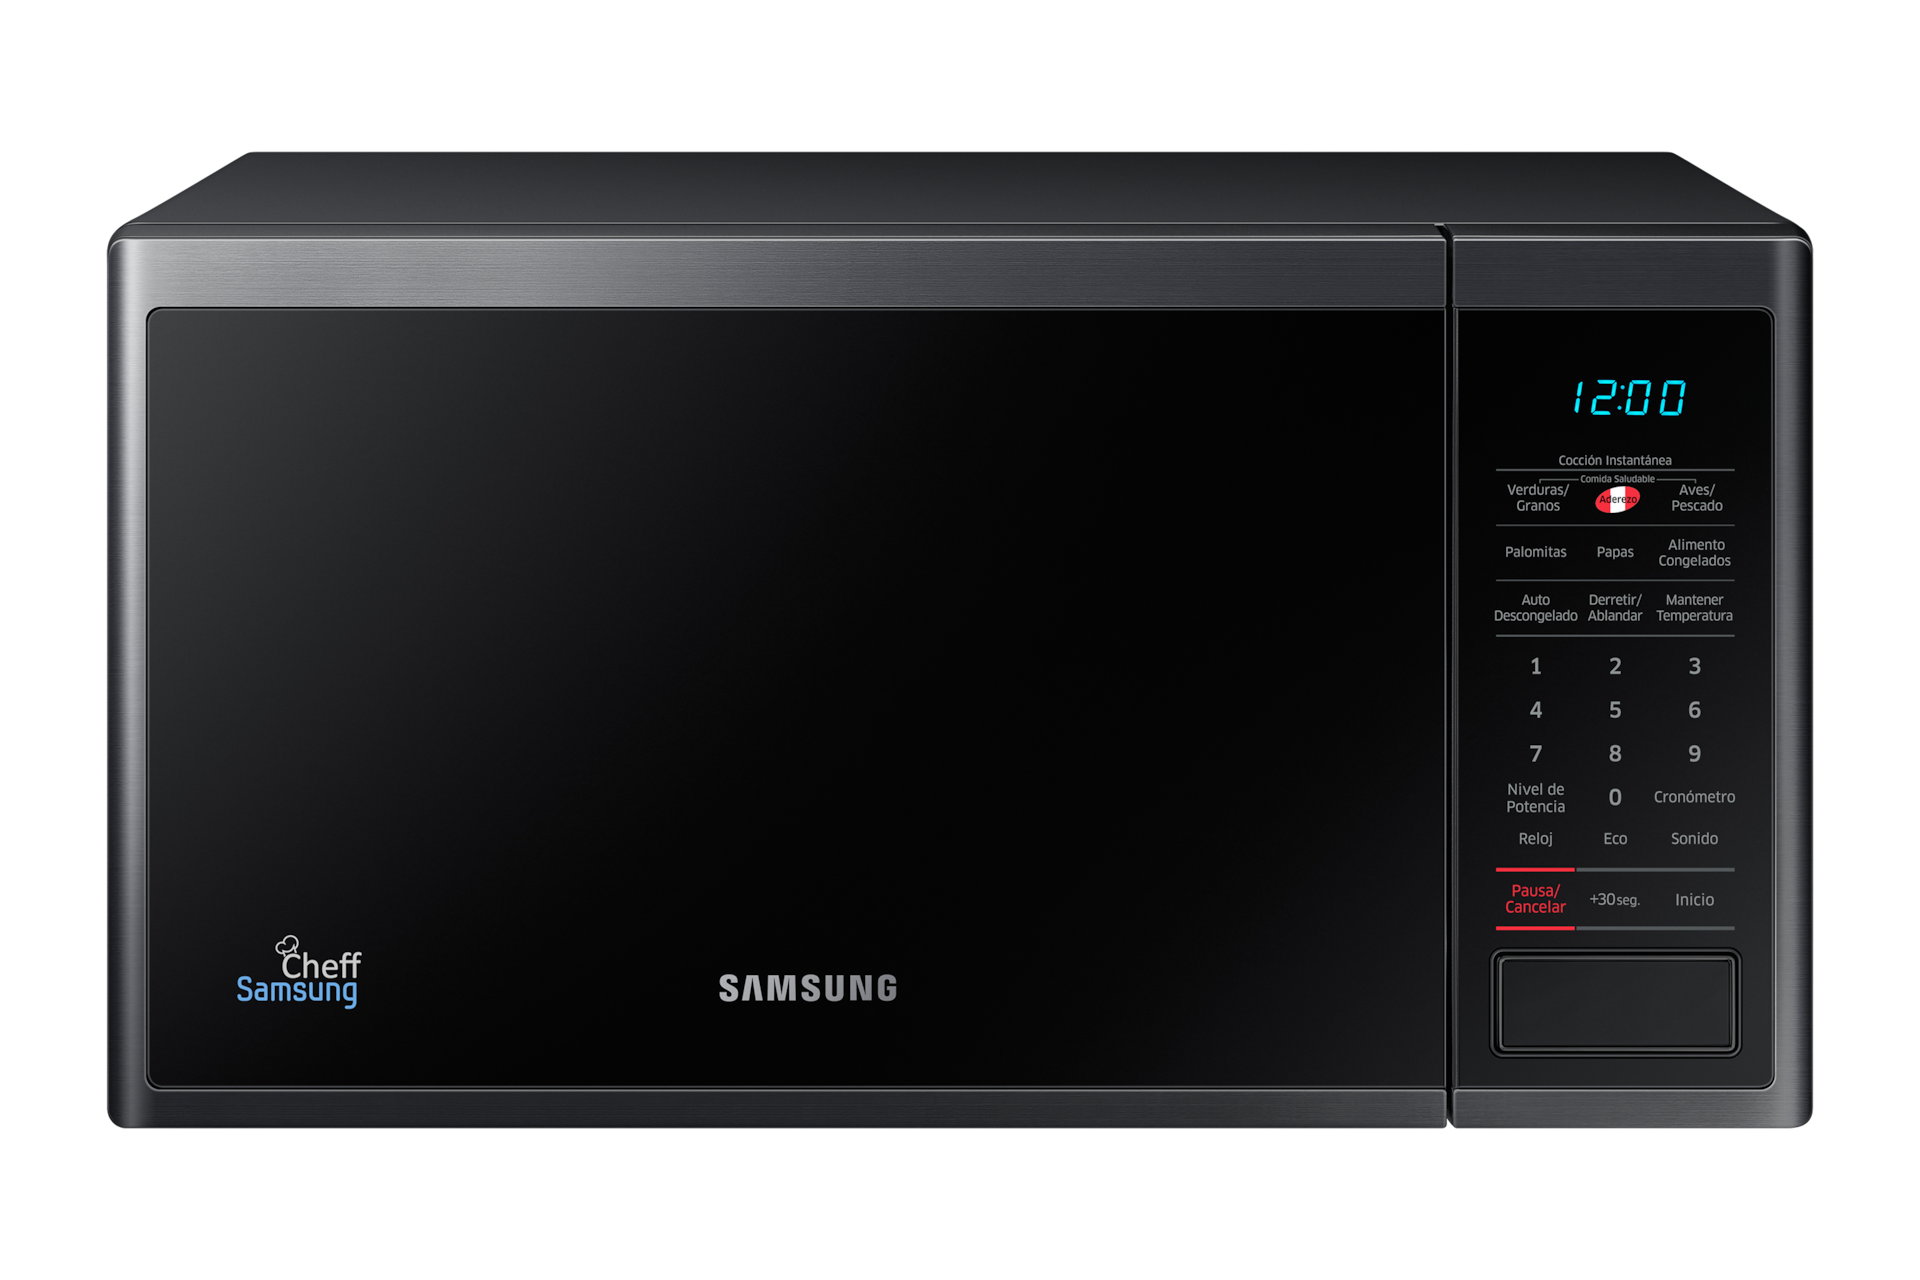 https://images.samsung.com/is/image/samsung/pe-microwave-oven-solo-ms23j5133ag-ms23j5133ag-pe-frontblack-105214765?$650_519_PNG$